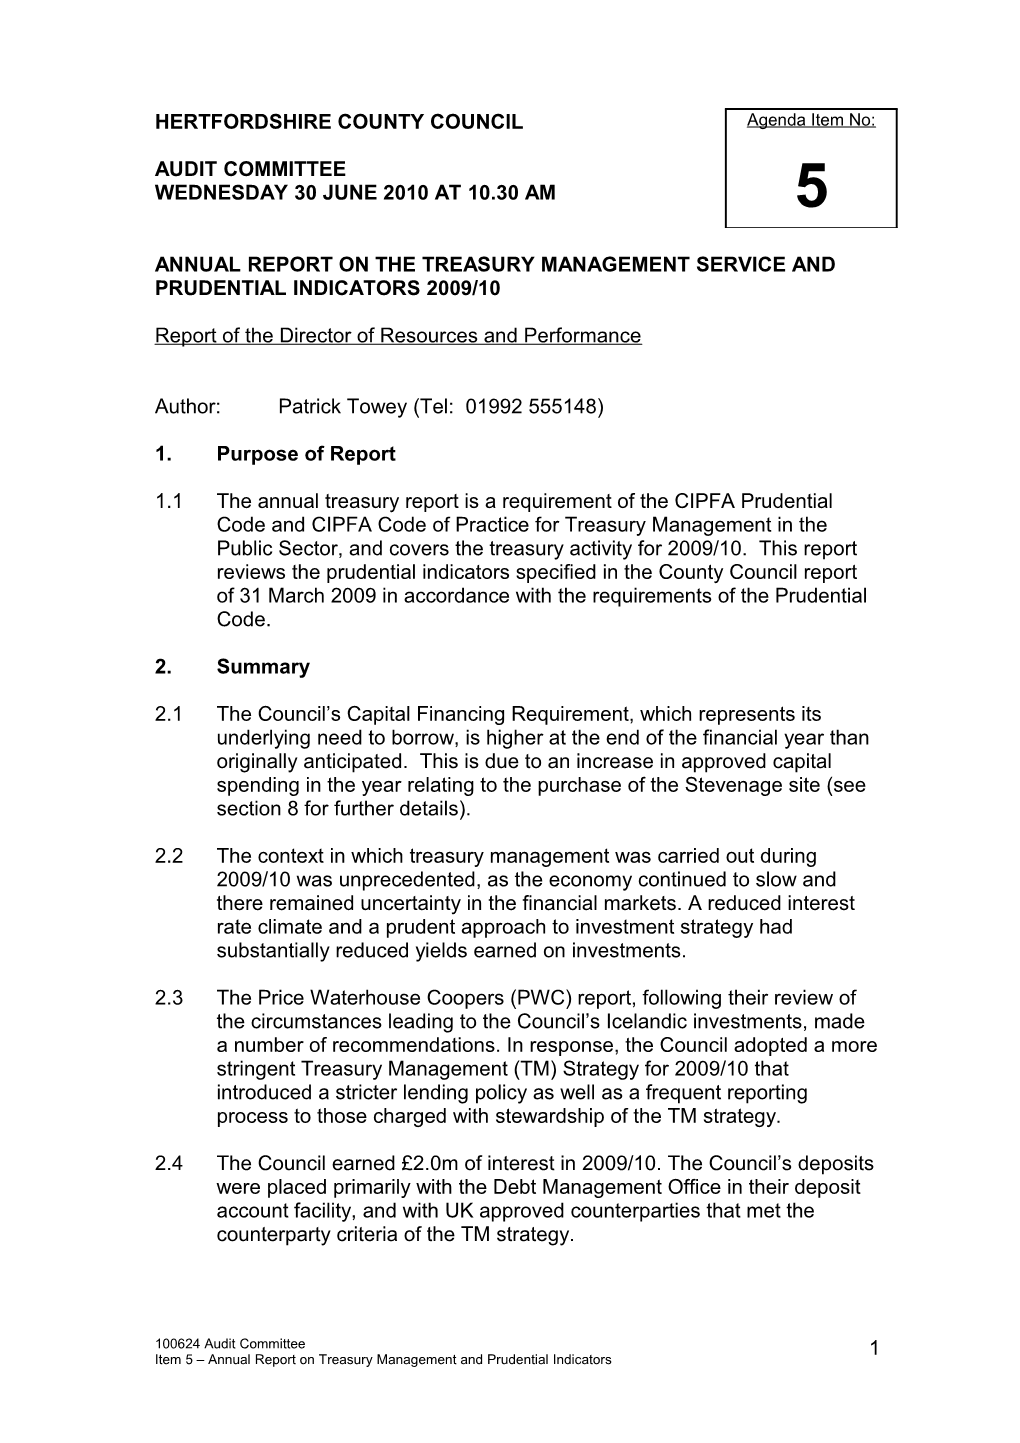 Audit Committee Wednesday 30 June 2010 at 10.30Pm Item 5 - Annual Report Om the Treasury